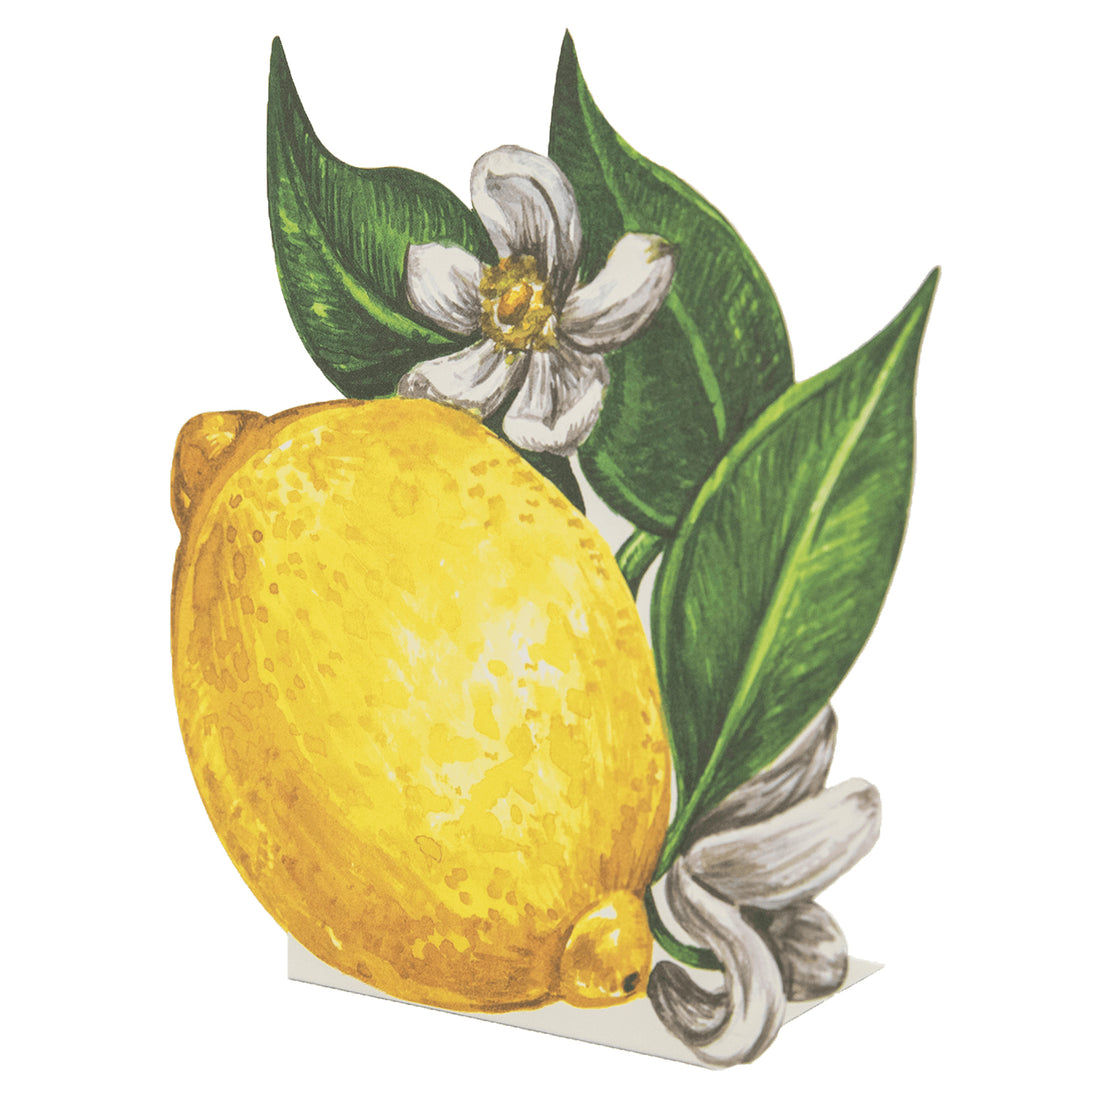 A die-cut freestanding place card featuring artwork of a vibrant yellow lemon with green leaves and white blossoms.